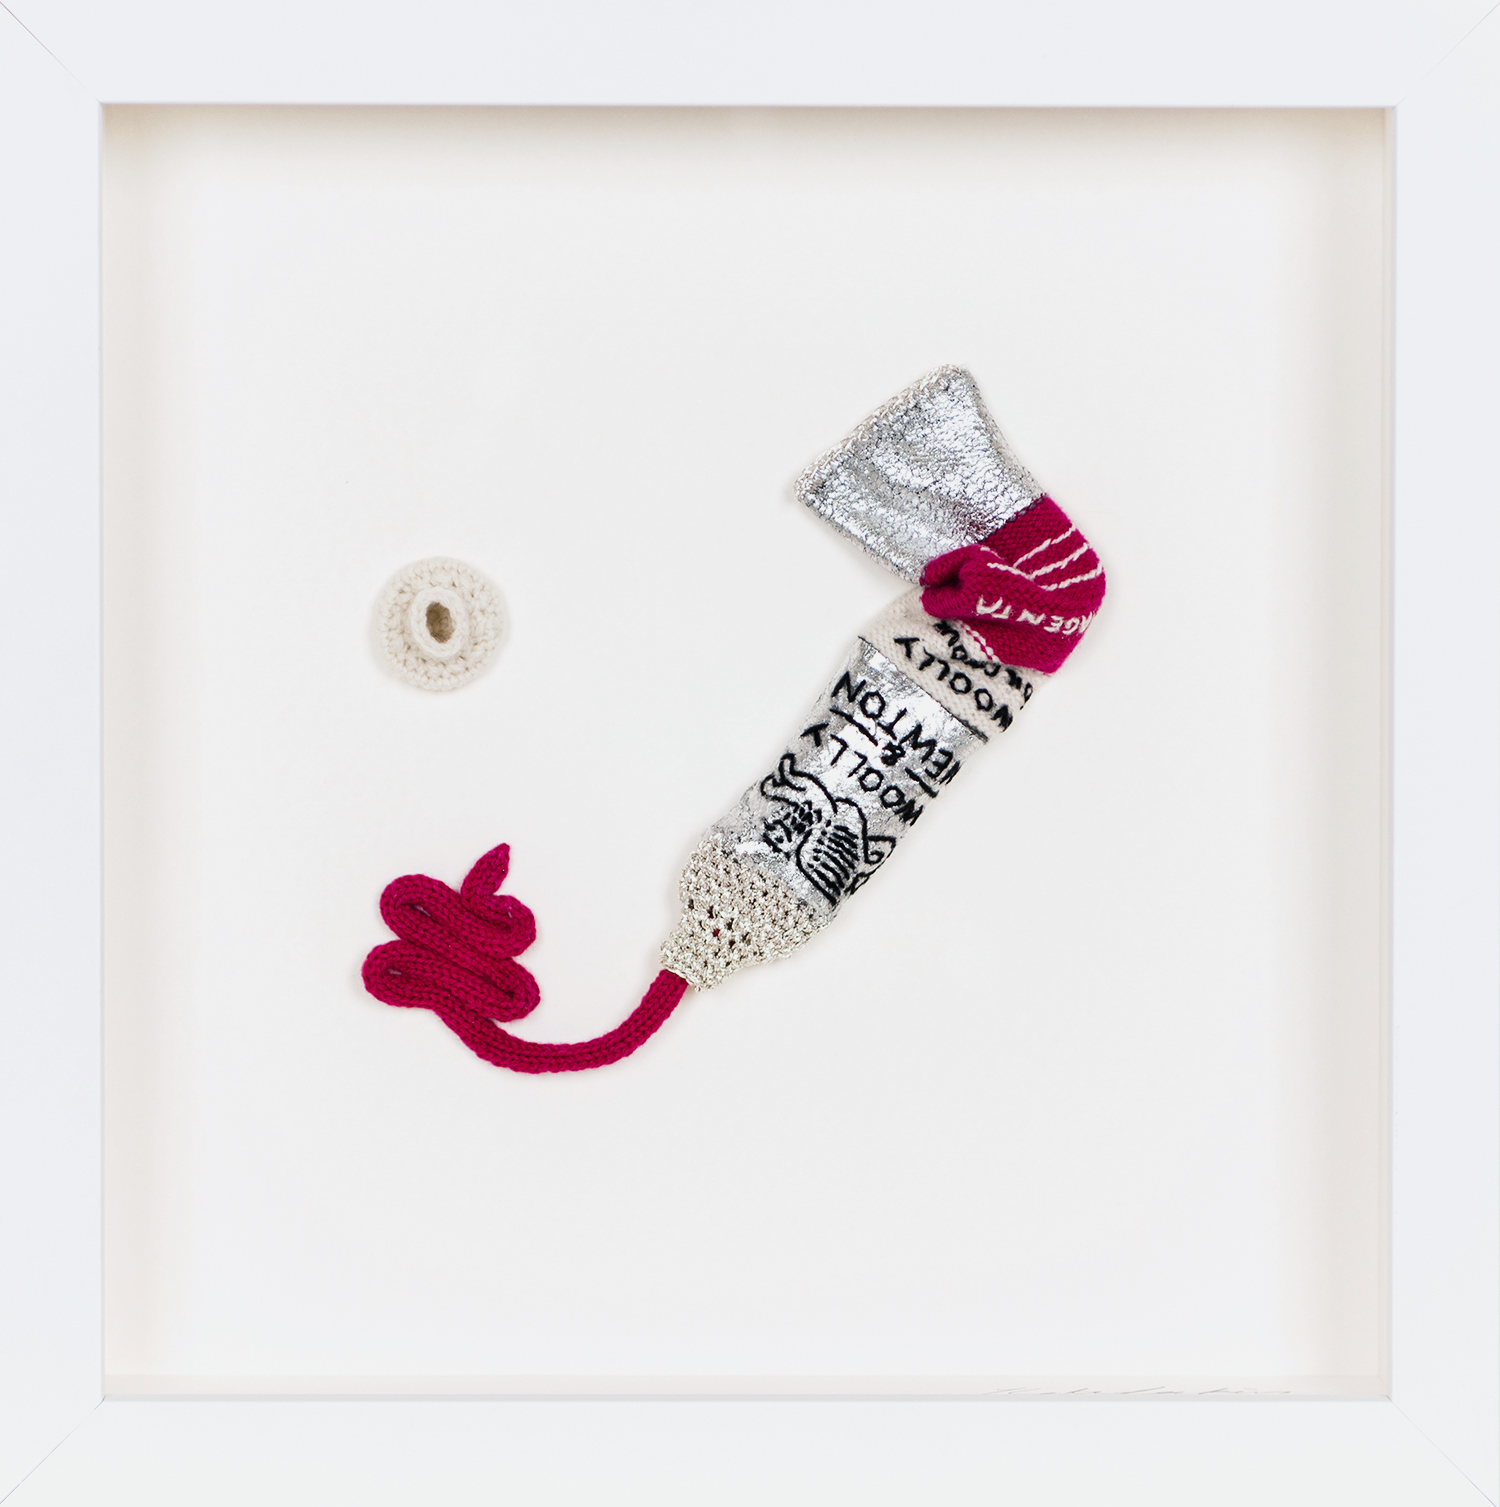 Magenta ‘Woolly & Newton’ Limited edition knitted paint tube